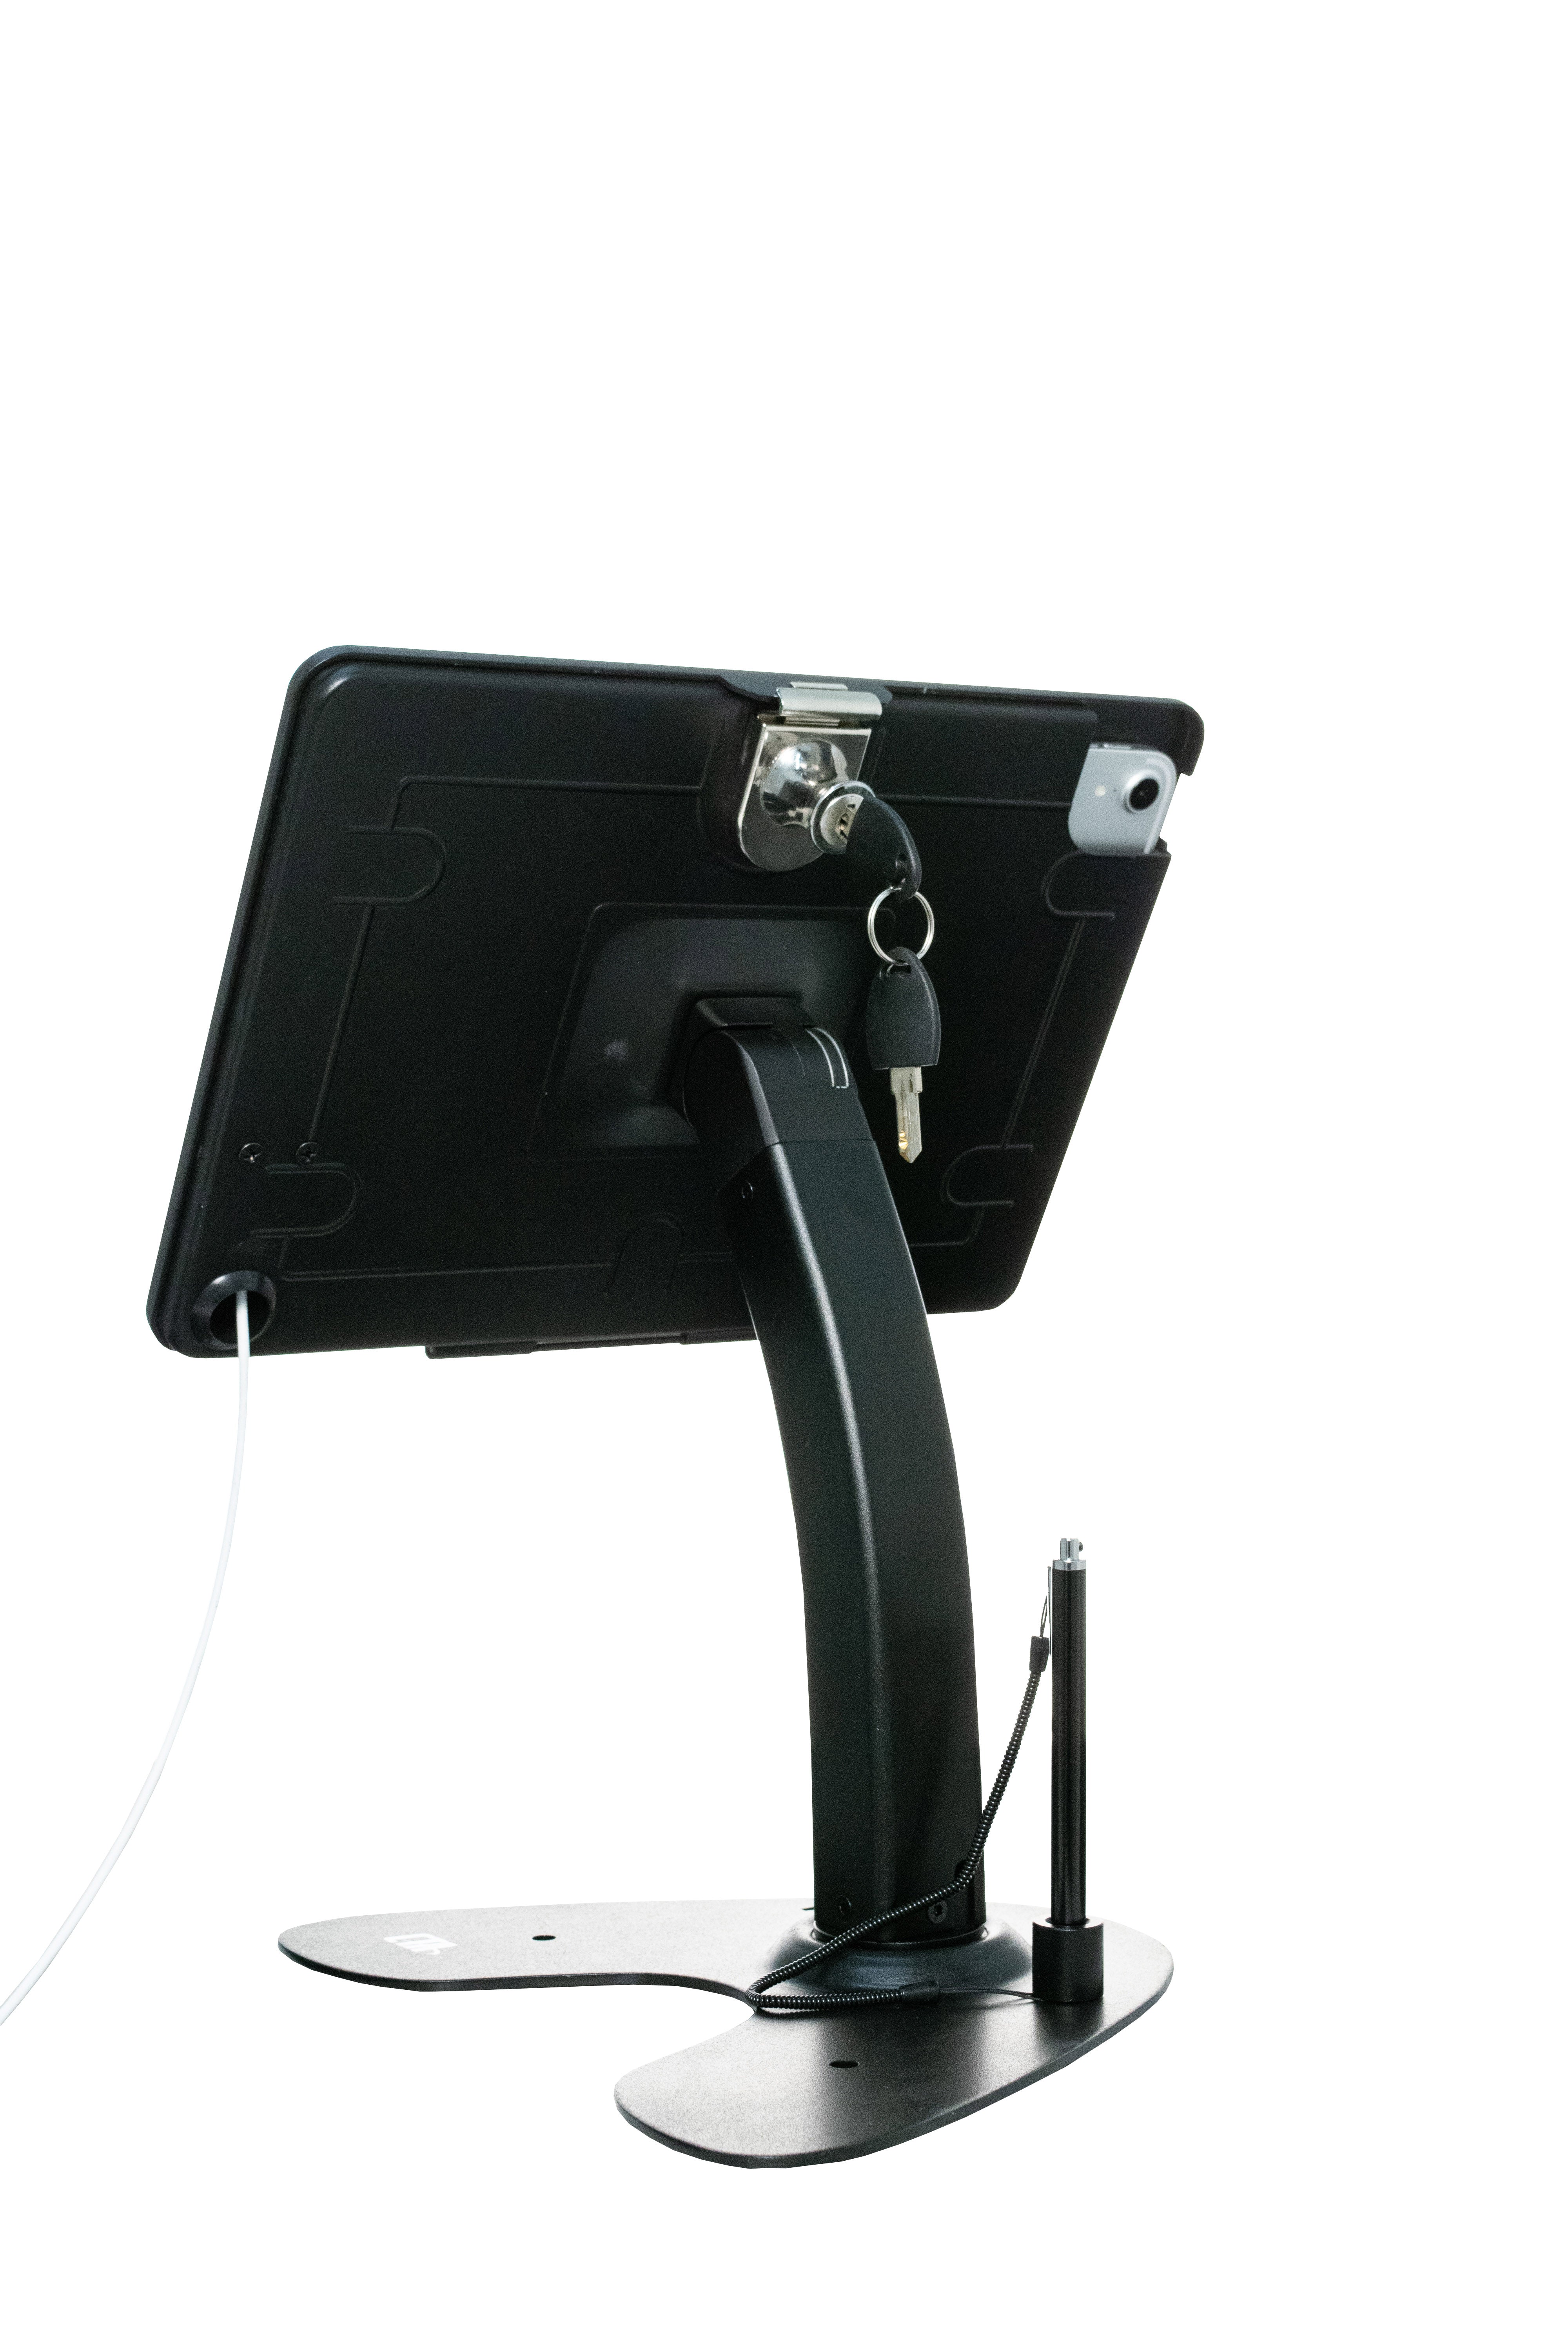 Dual Security Kiosk Stand with Locking Case and Cable for 11-inch iPad Pro